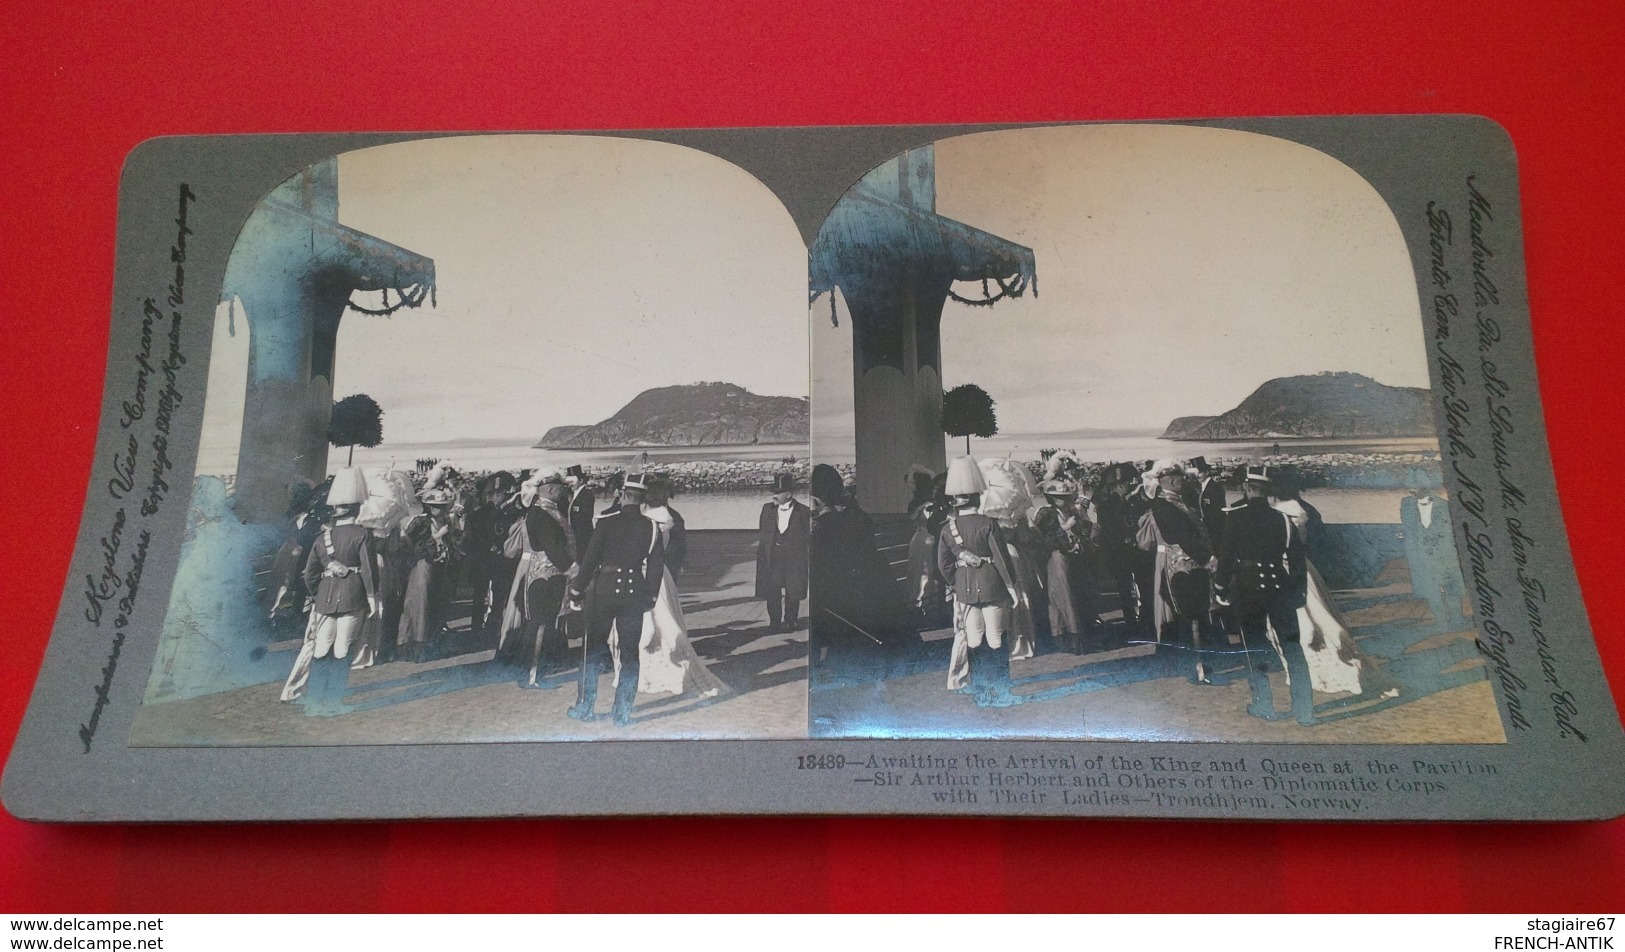 PHOTO STEREO ARRIVAL OF THE KING AND QUEEN SIR ARTHUR DIPLOMATIE CORPS TRONDHJEM NORWAY - Stereo-Photographie